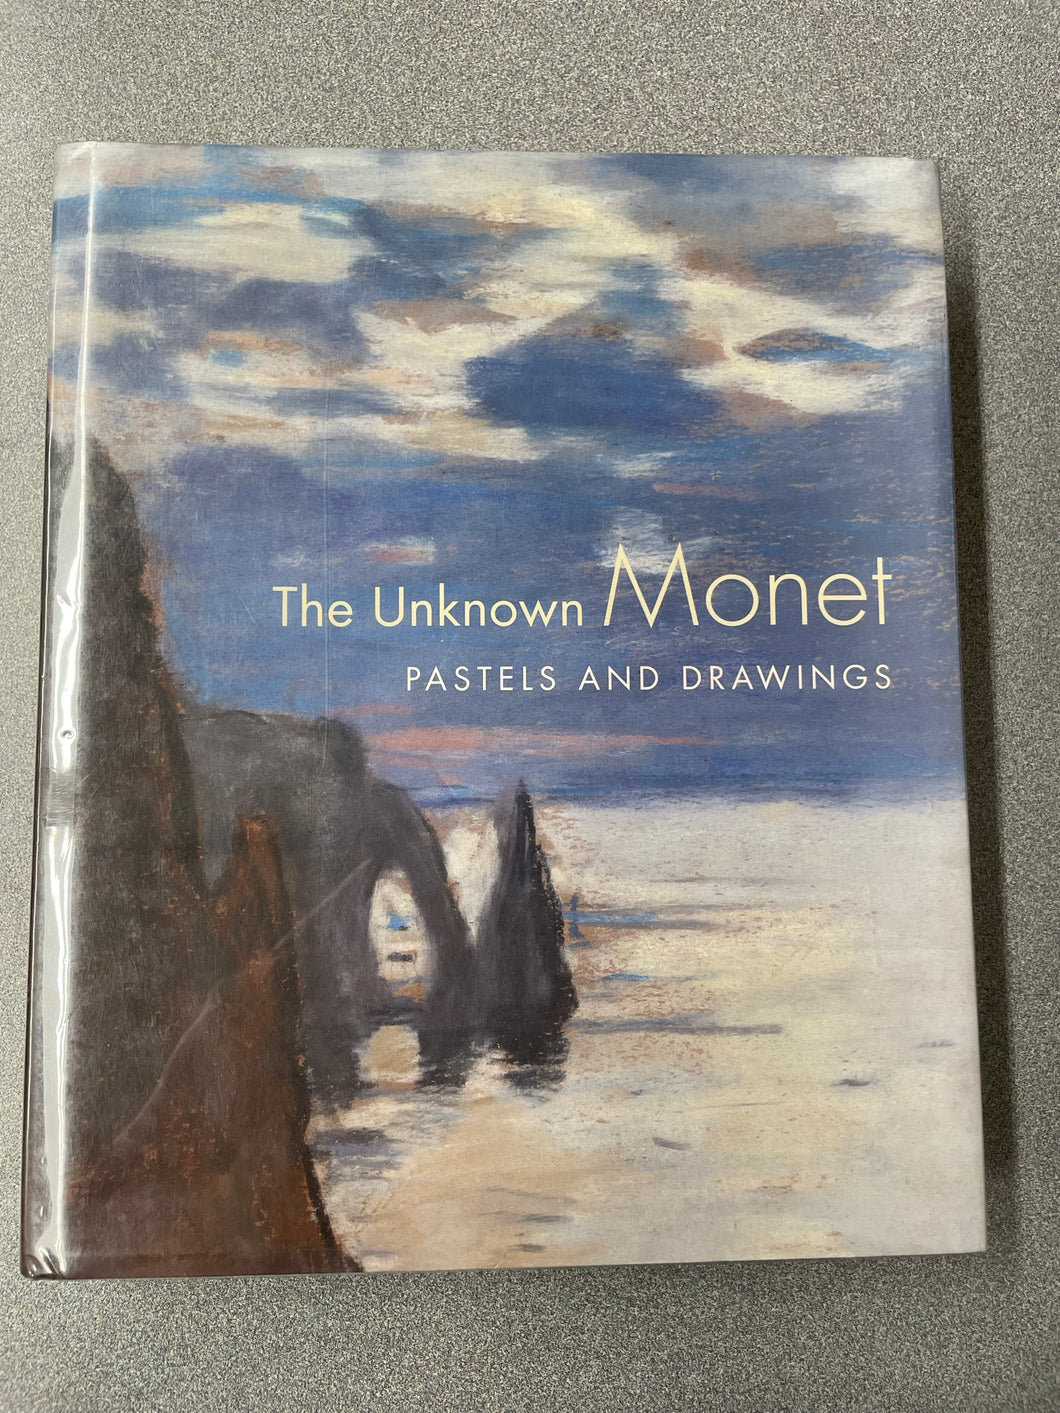 The Unknown Monet: Pastels and Drawings, 2007] A 8/23